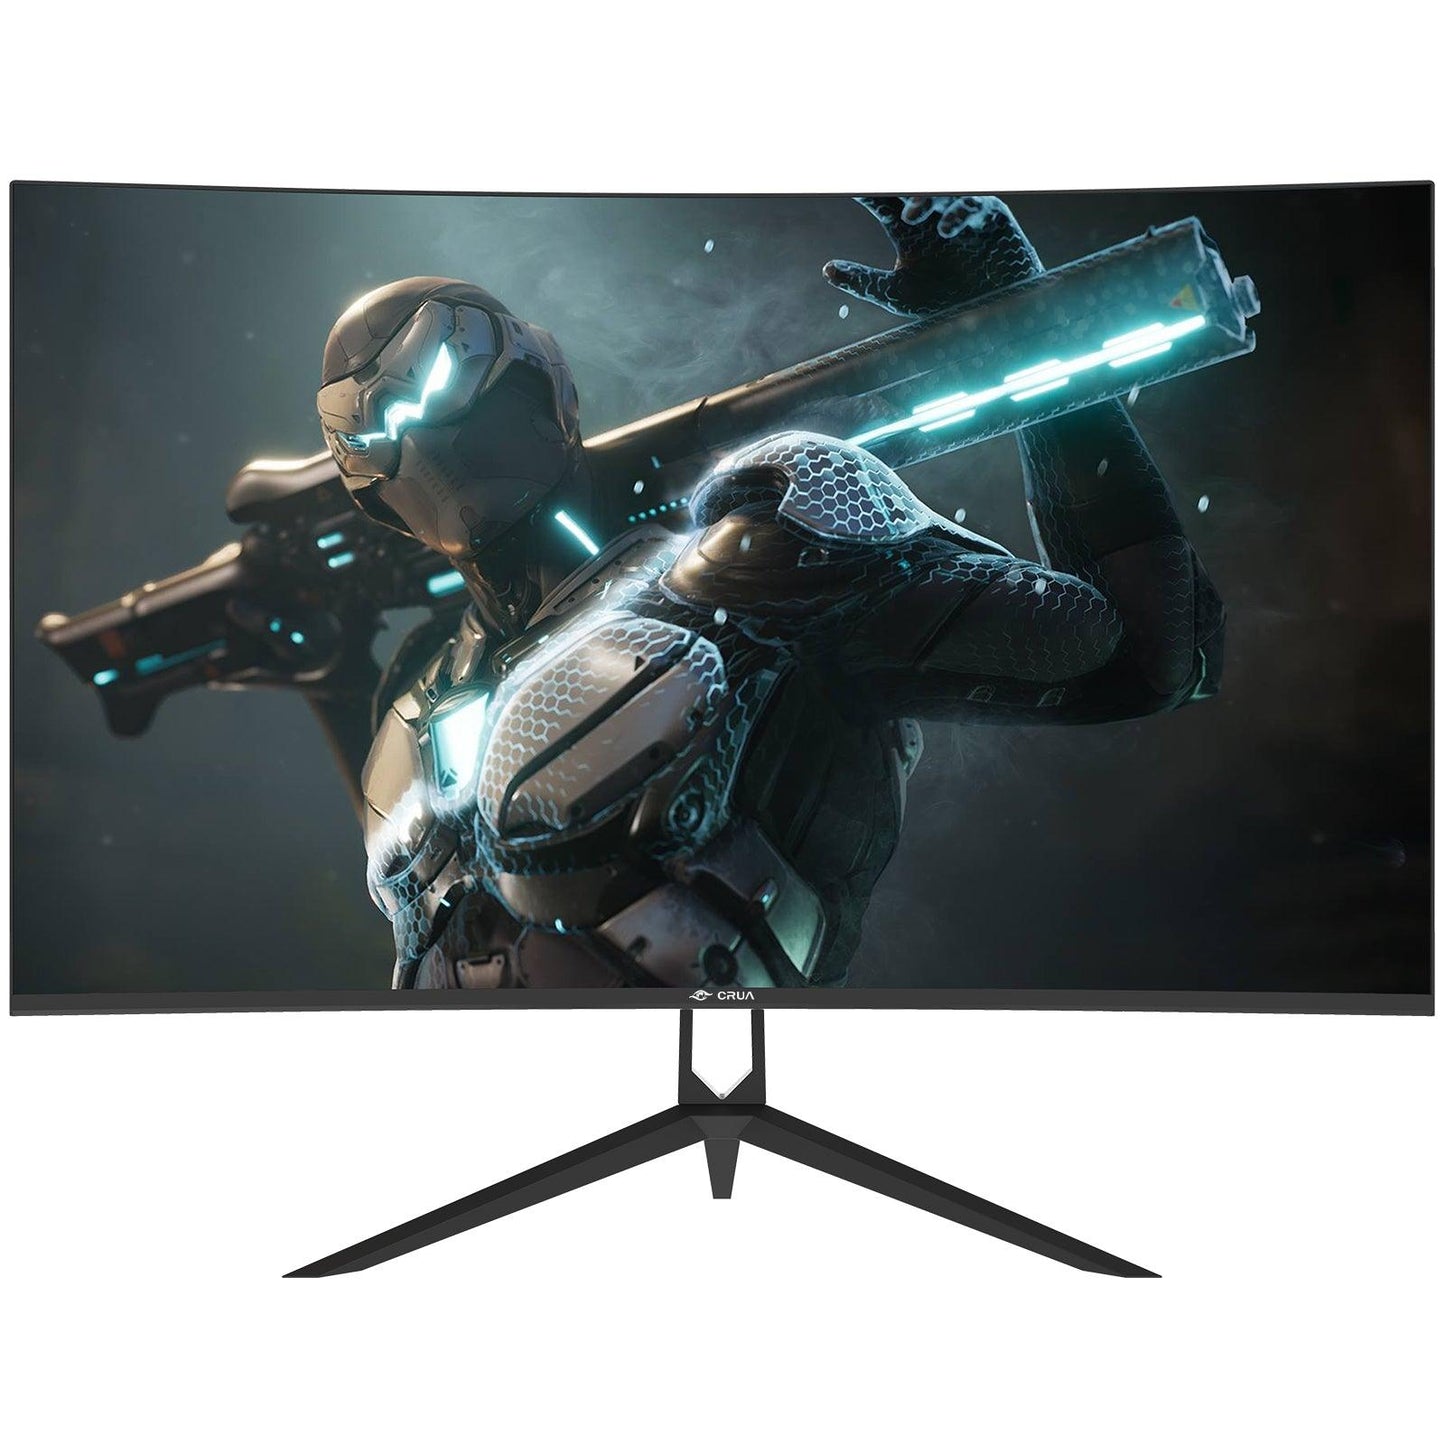 Why Choose a 27” Monitor for QHD 1440p Gaming